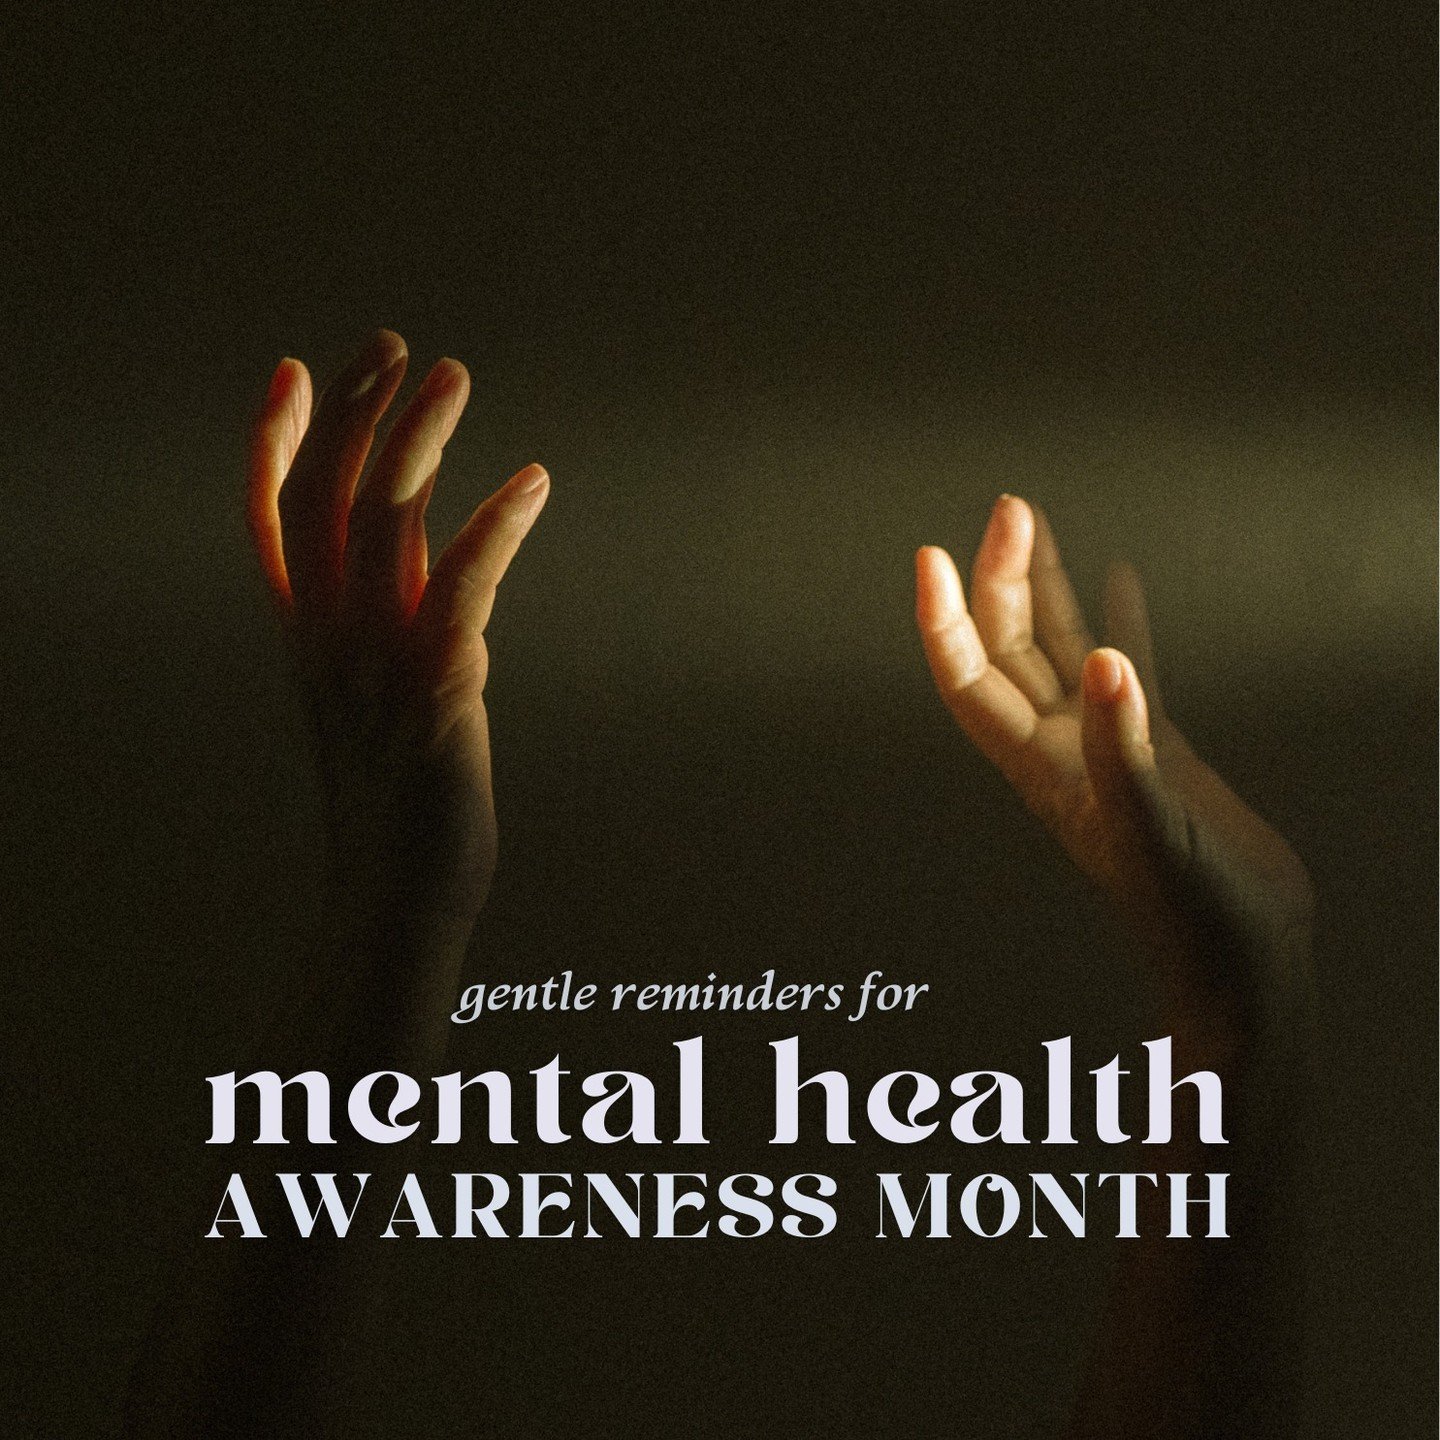 May is #MentalHealthAwarenessMonth, and here at Bloom Therapy, we want to share some reminders with you:

🌹 It's absolutely okay to not be okay. Your mental health deserves just as much attention as your physical well-being. Please don't hesitate to